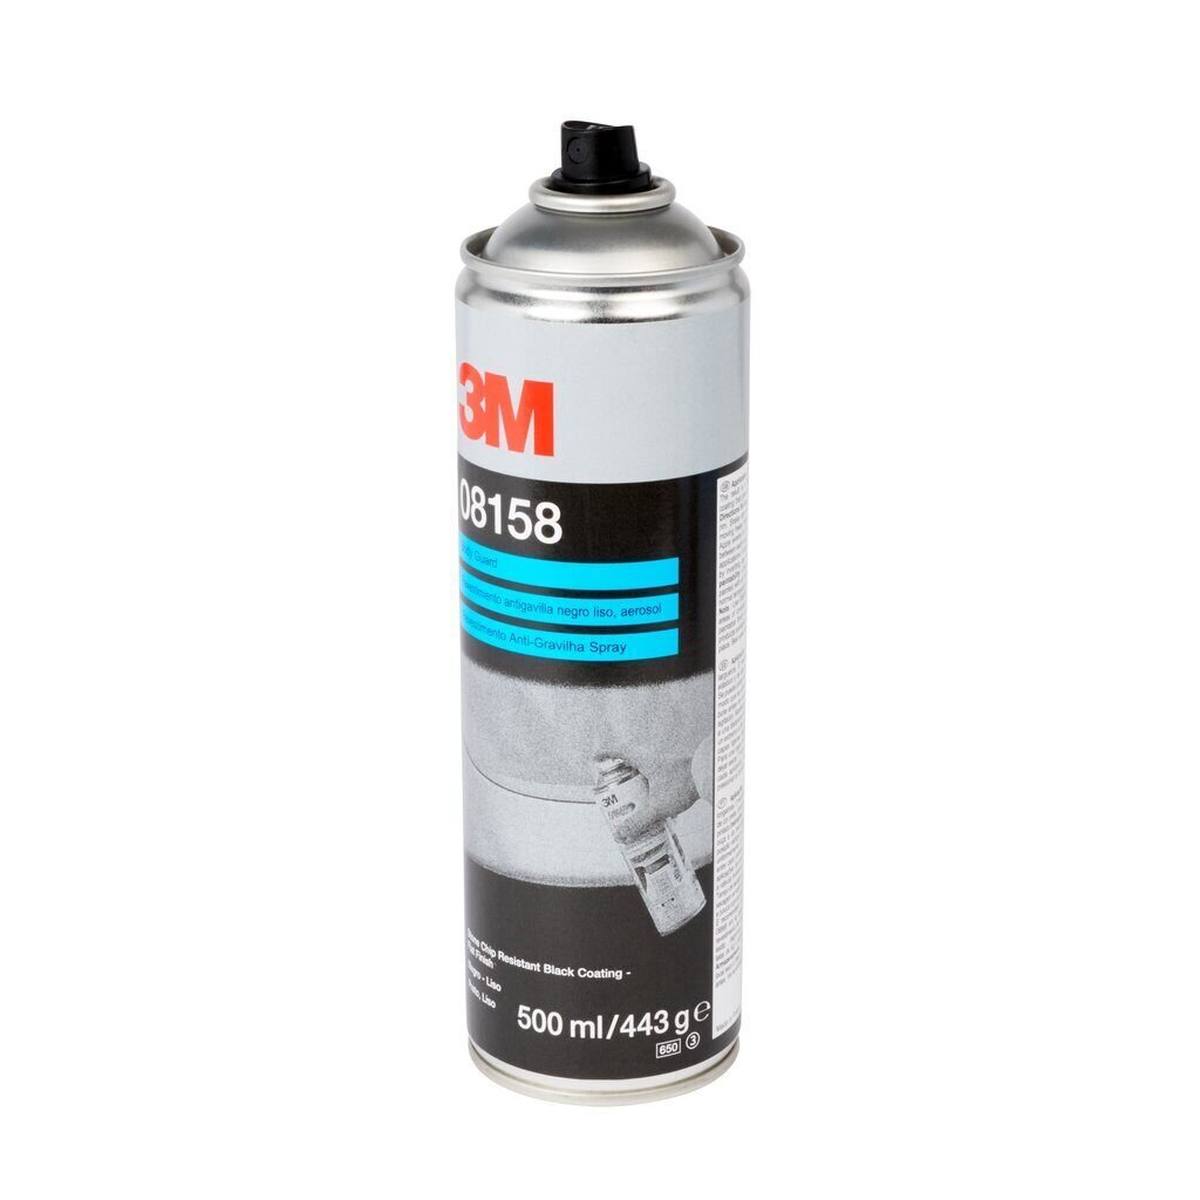 3M Stone chip protection spray / with flat structure, black, 500 ml #08158